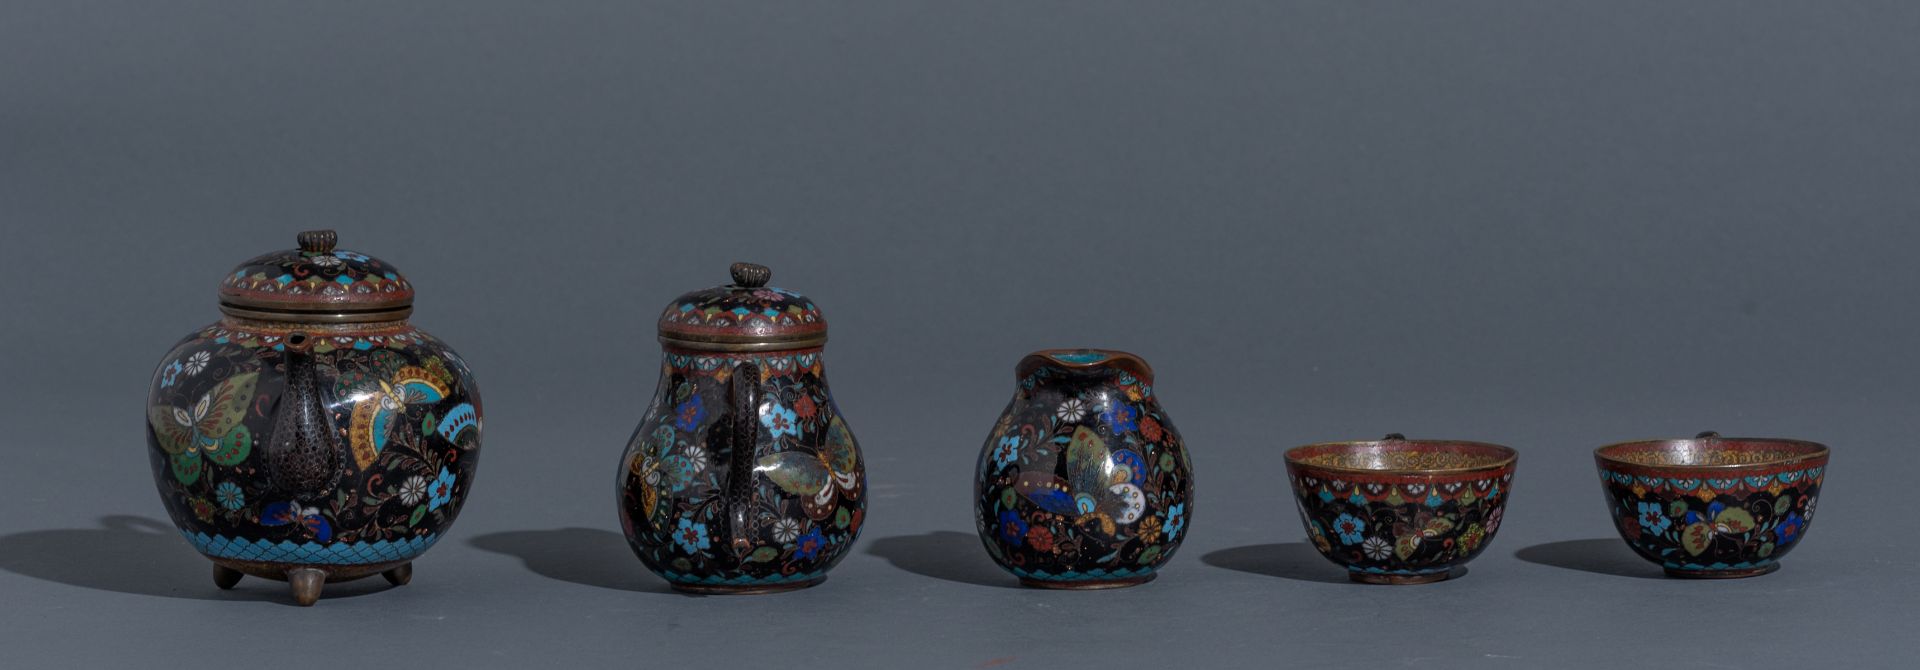 A Japanese cloisonné enamel tea set, i.e. a tray, two cups and saucers, a teapot and cover, a milk j - Image 7 of 9